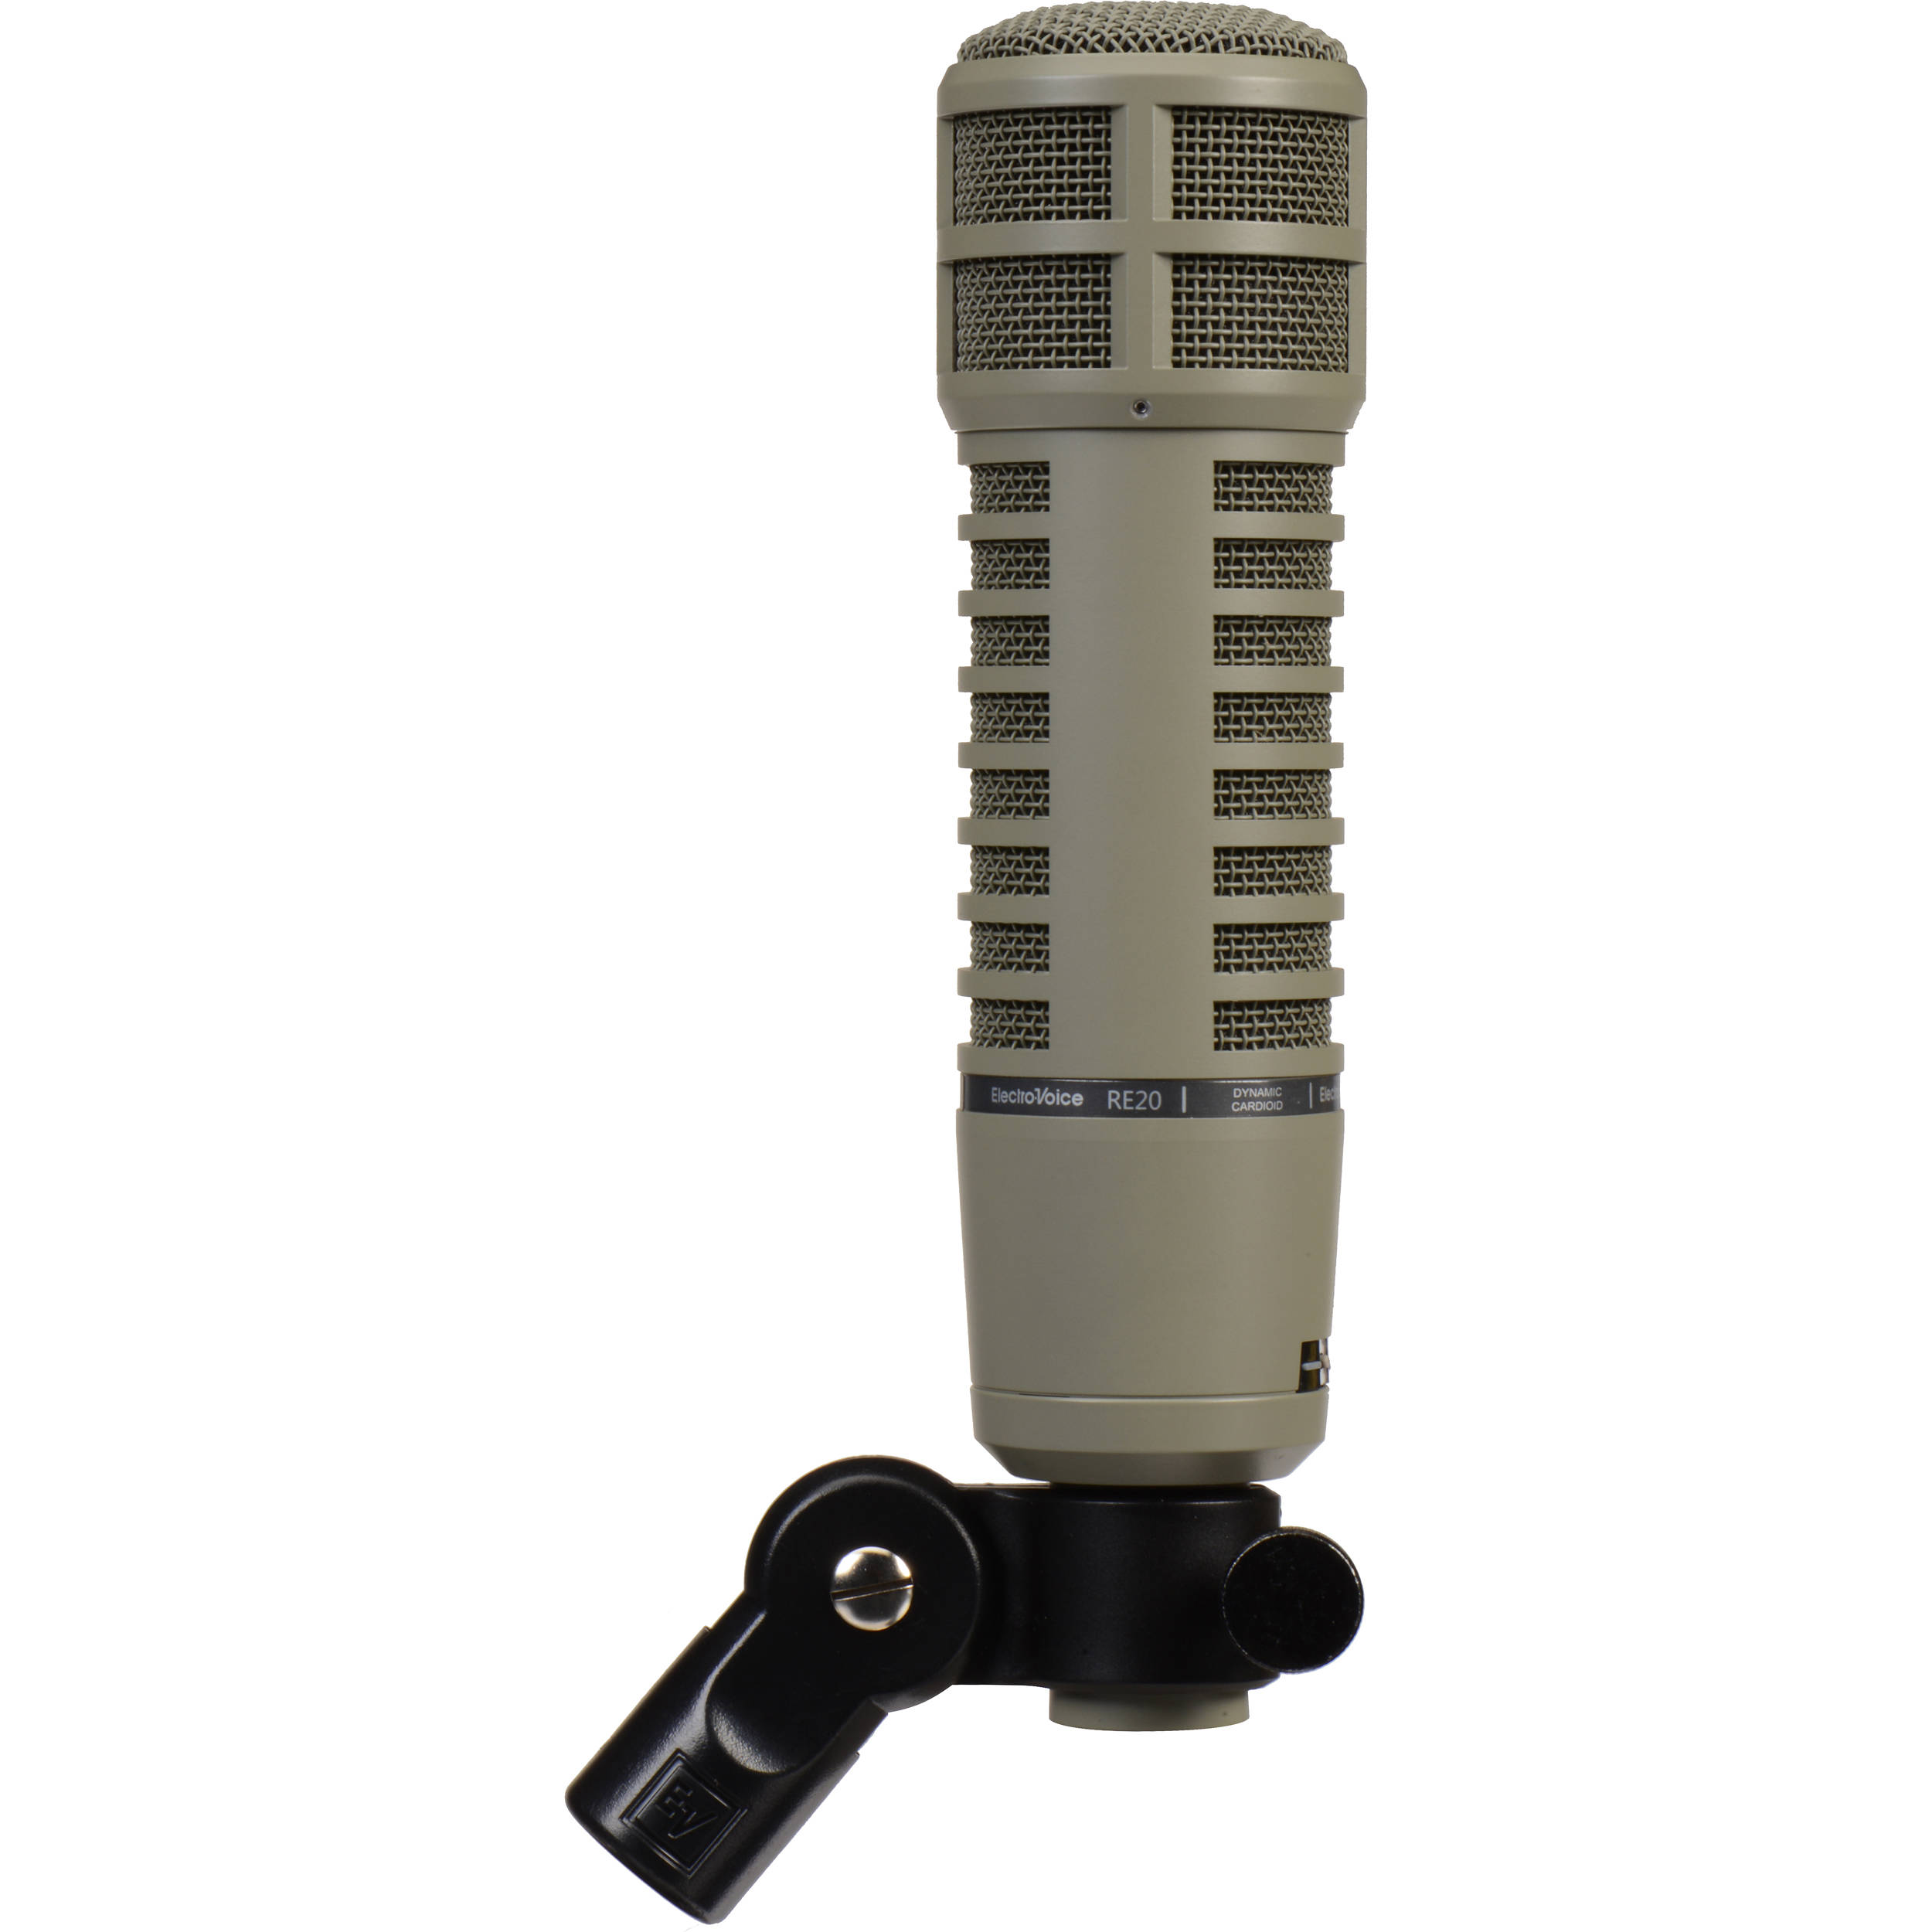 Electro Voice Microphone Serial Numbers